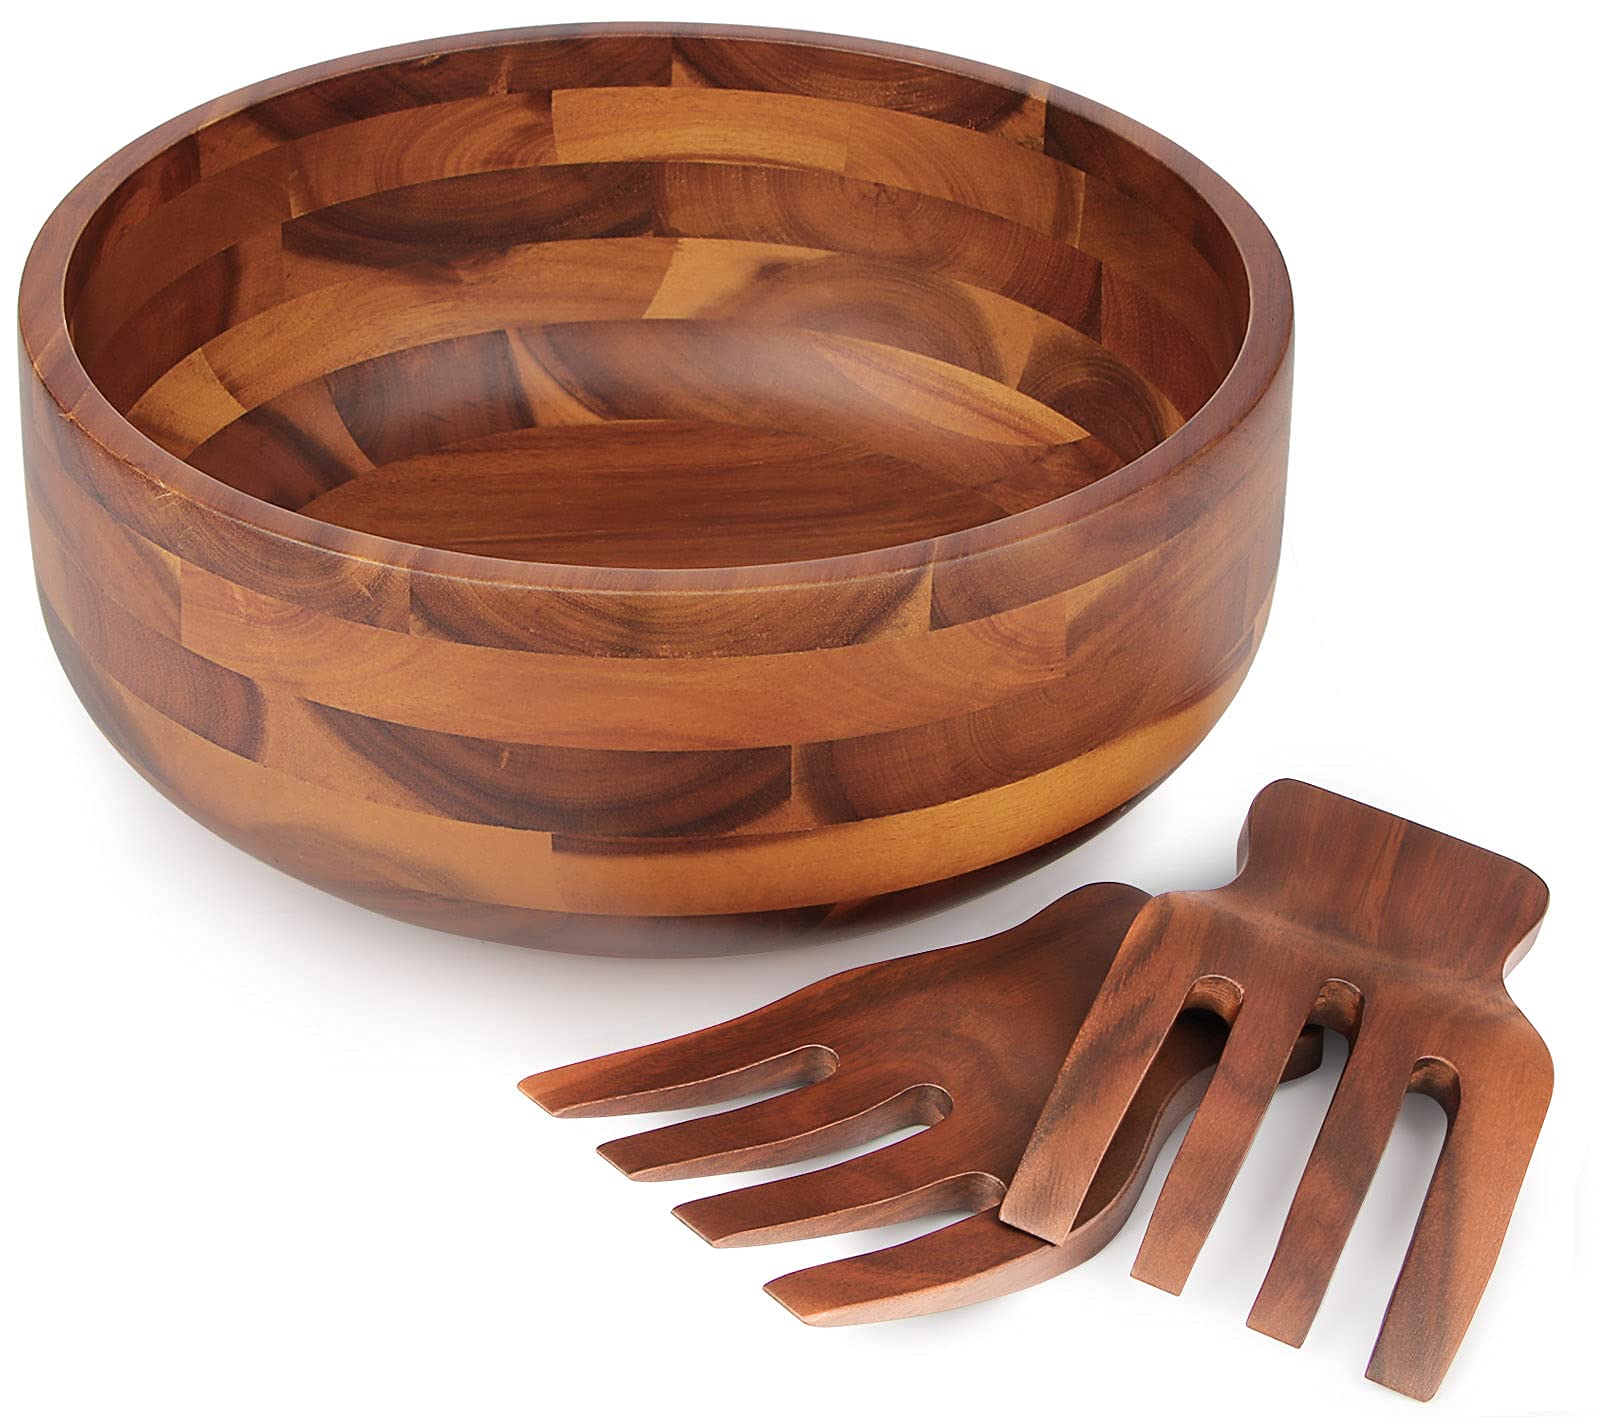 AIDEA Acacia Wood Salad Bowl Set with 2 Wooden Hands, Large Salad Bowl with Serving Utensils, Big Mixing Bowl for Fruits, Salad,